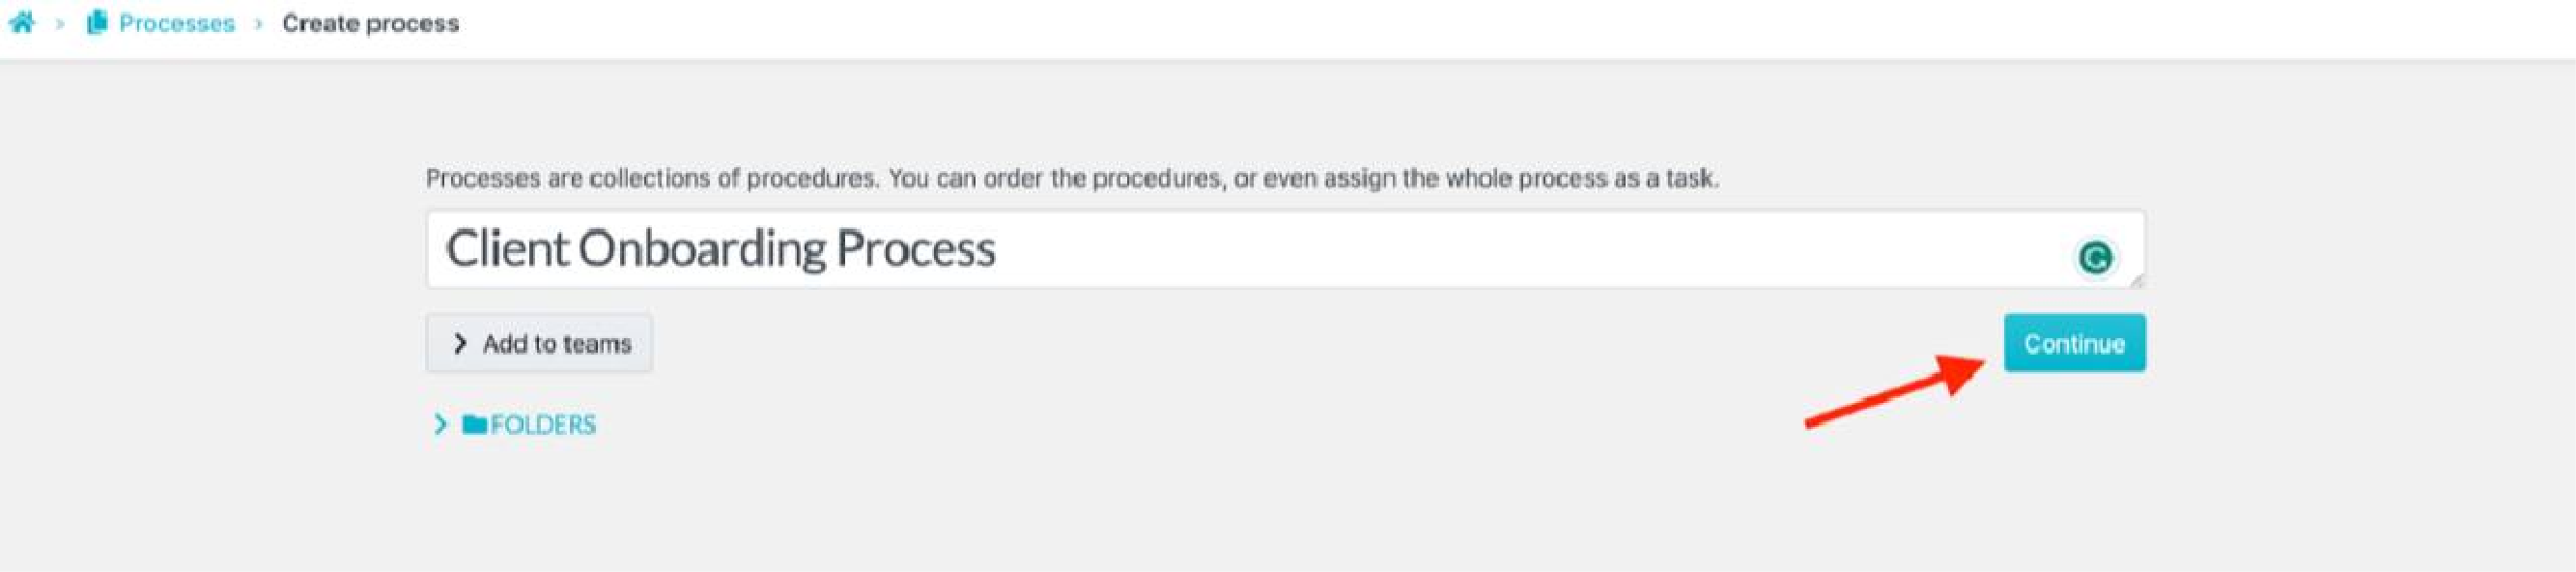 Select the "Create Process" option to initiate a new workflow to proceed.